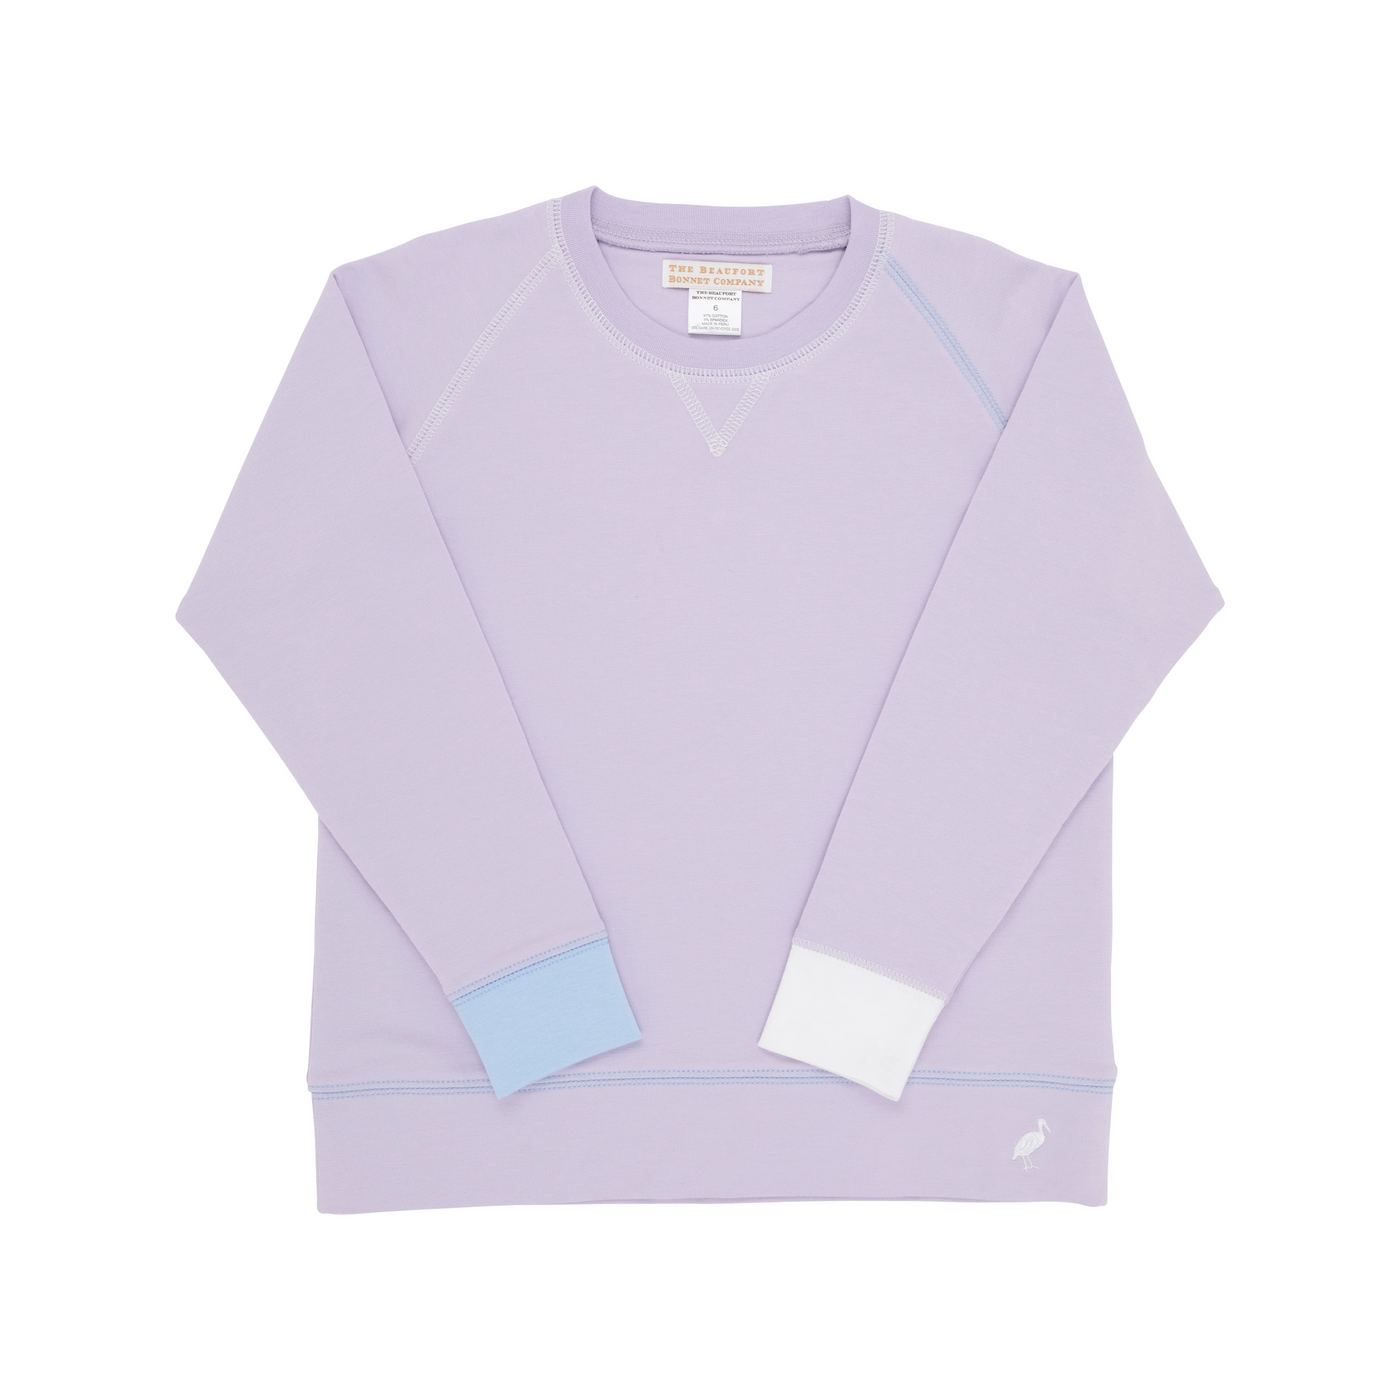 Cassidy Comfy Crewneck - Lauderdale Lavender With Worth Avenue White And Beale Street Blue